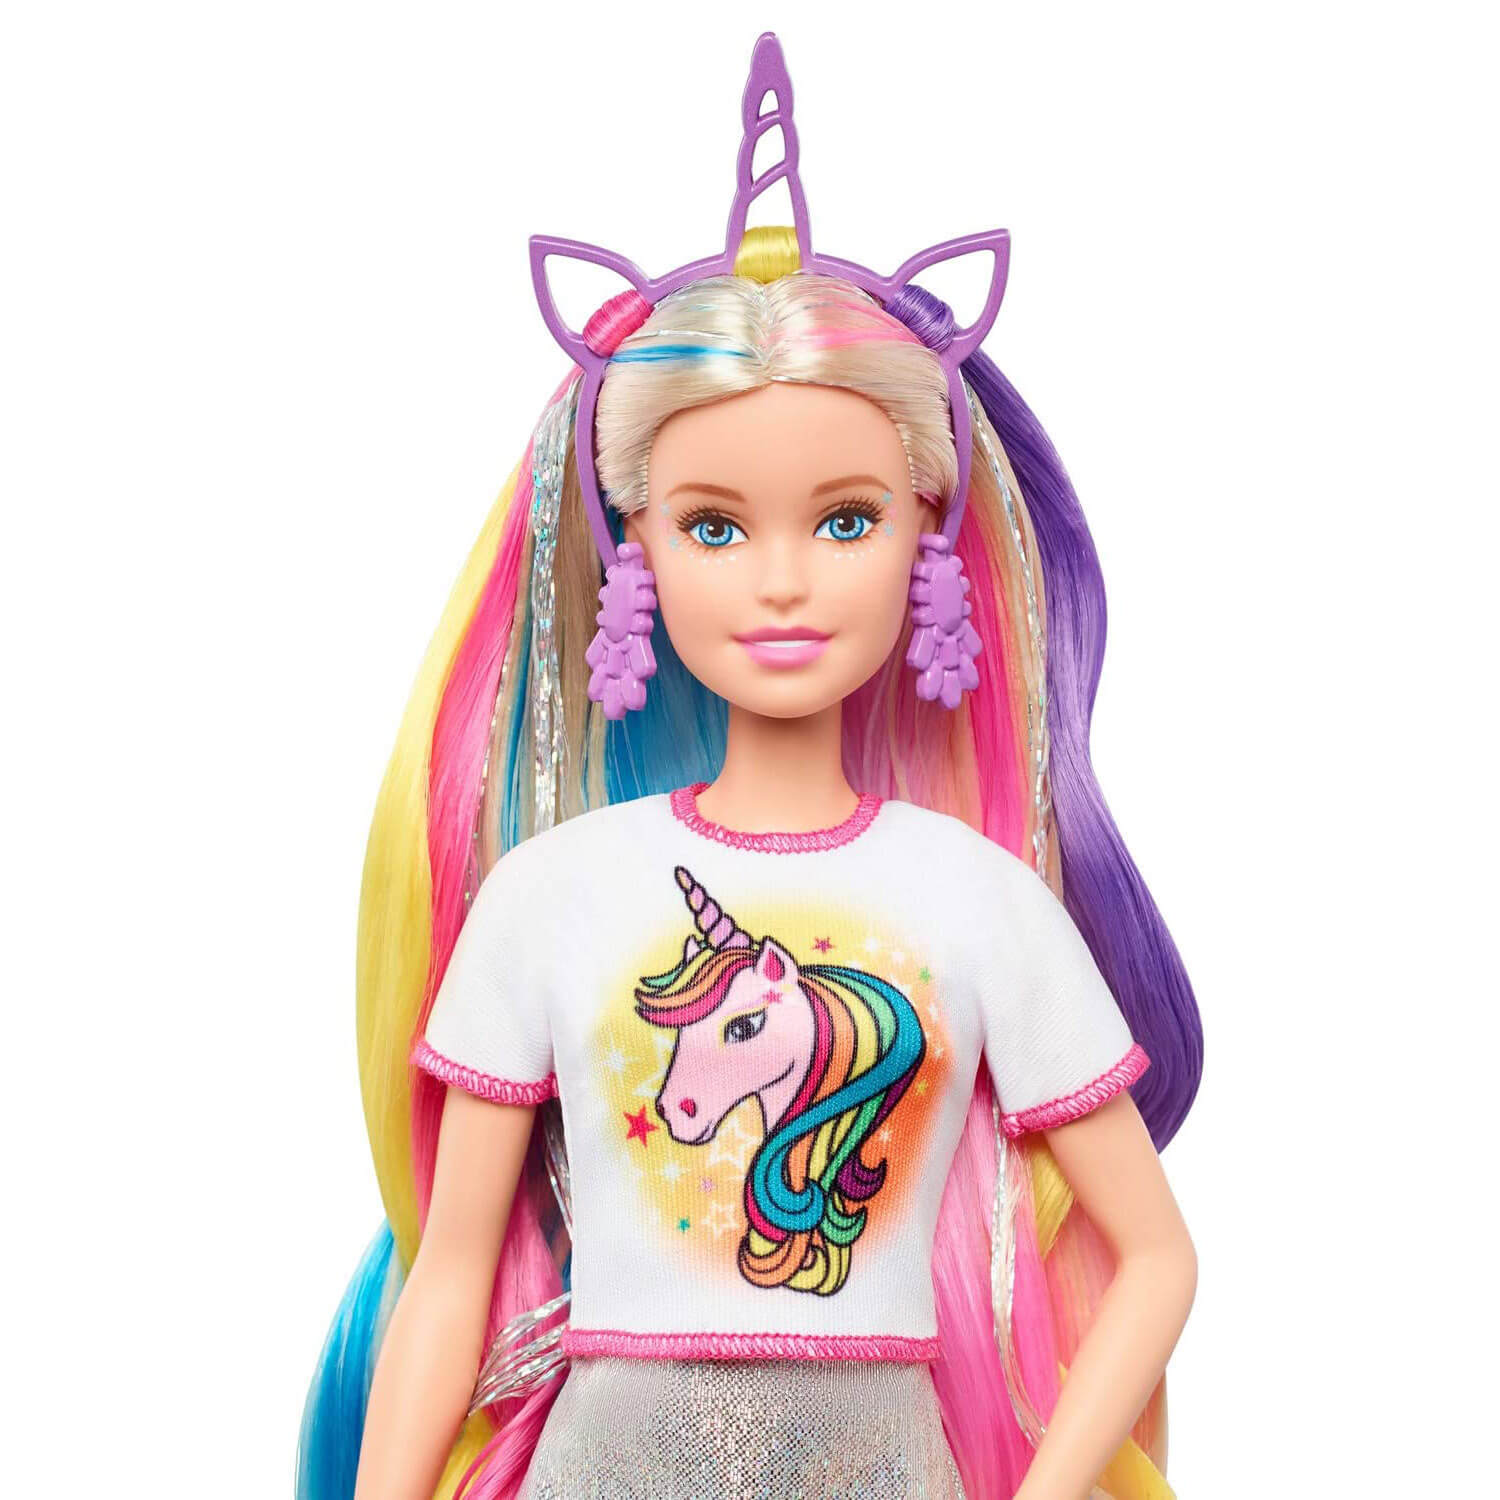 Barbie Fantasy Hair Doll with Accessories